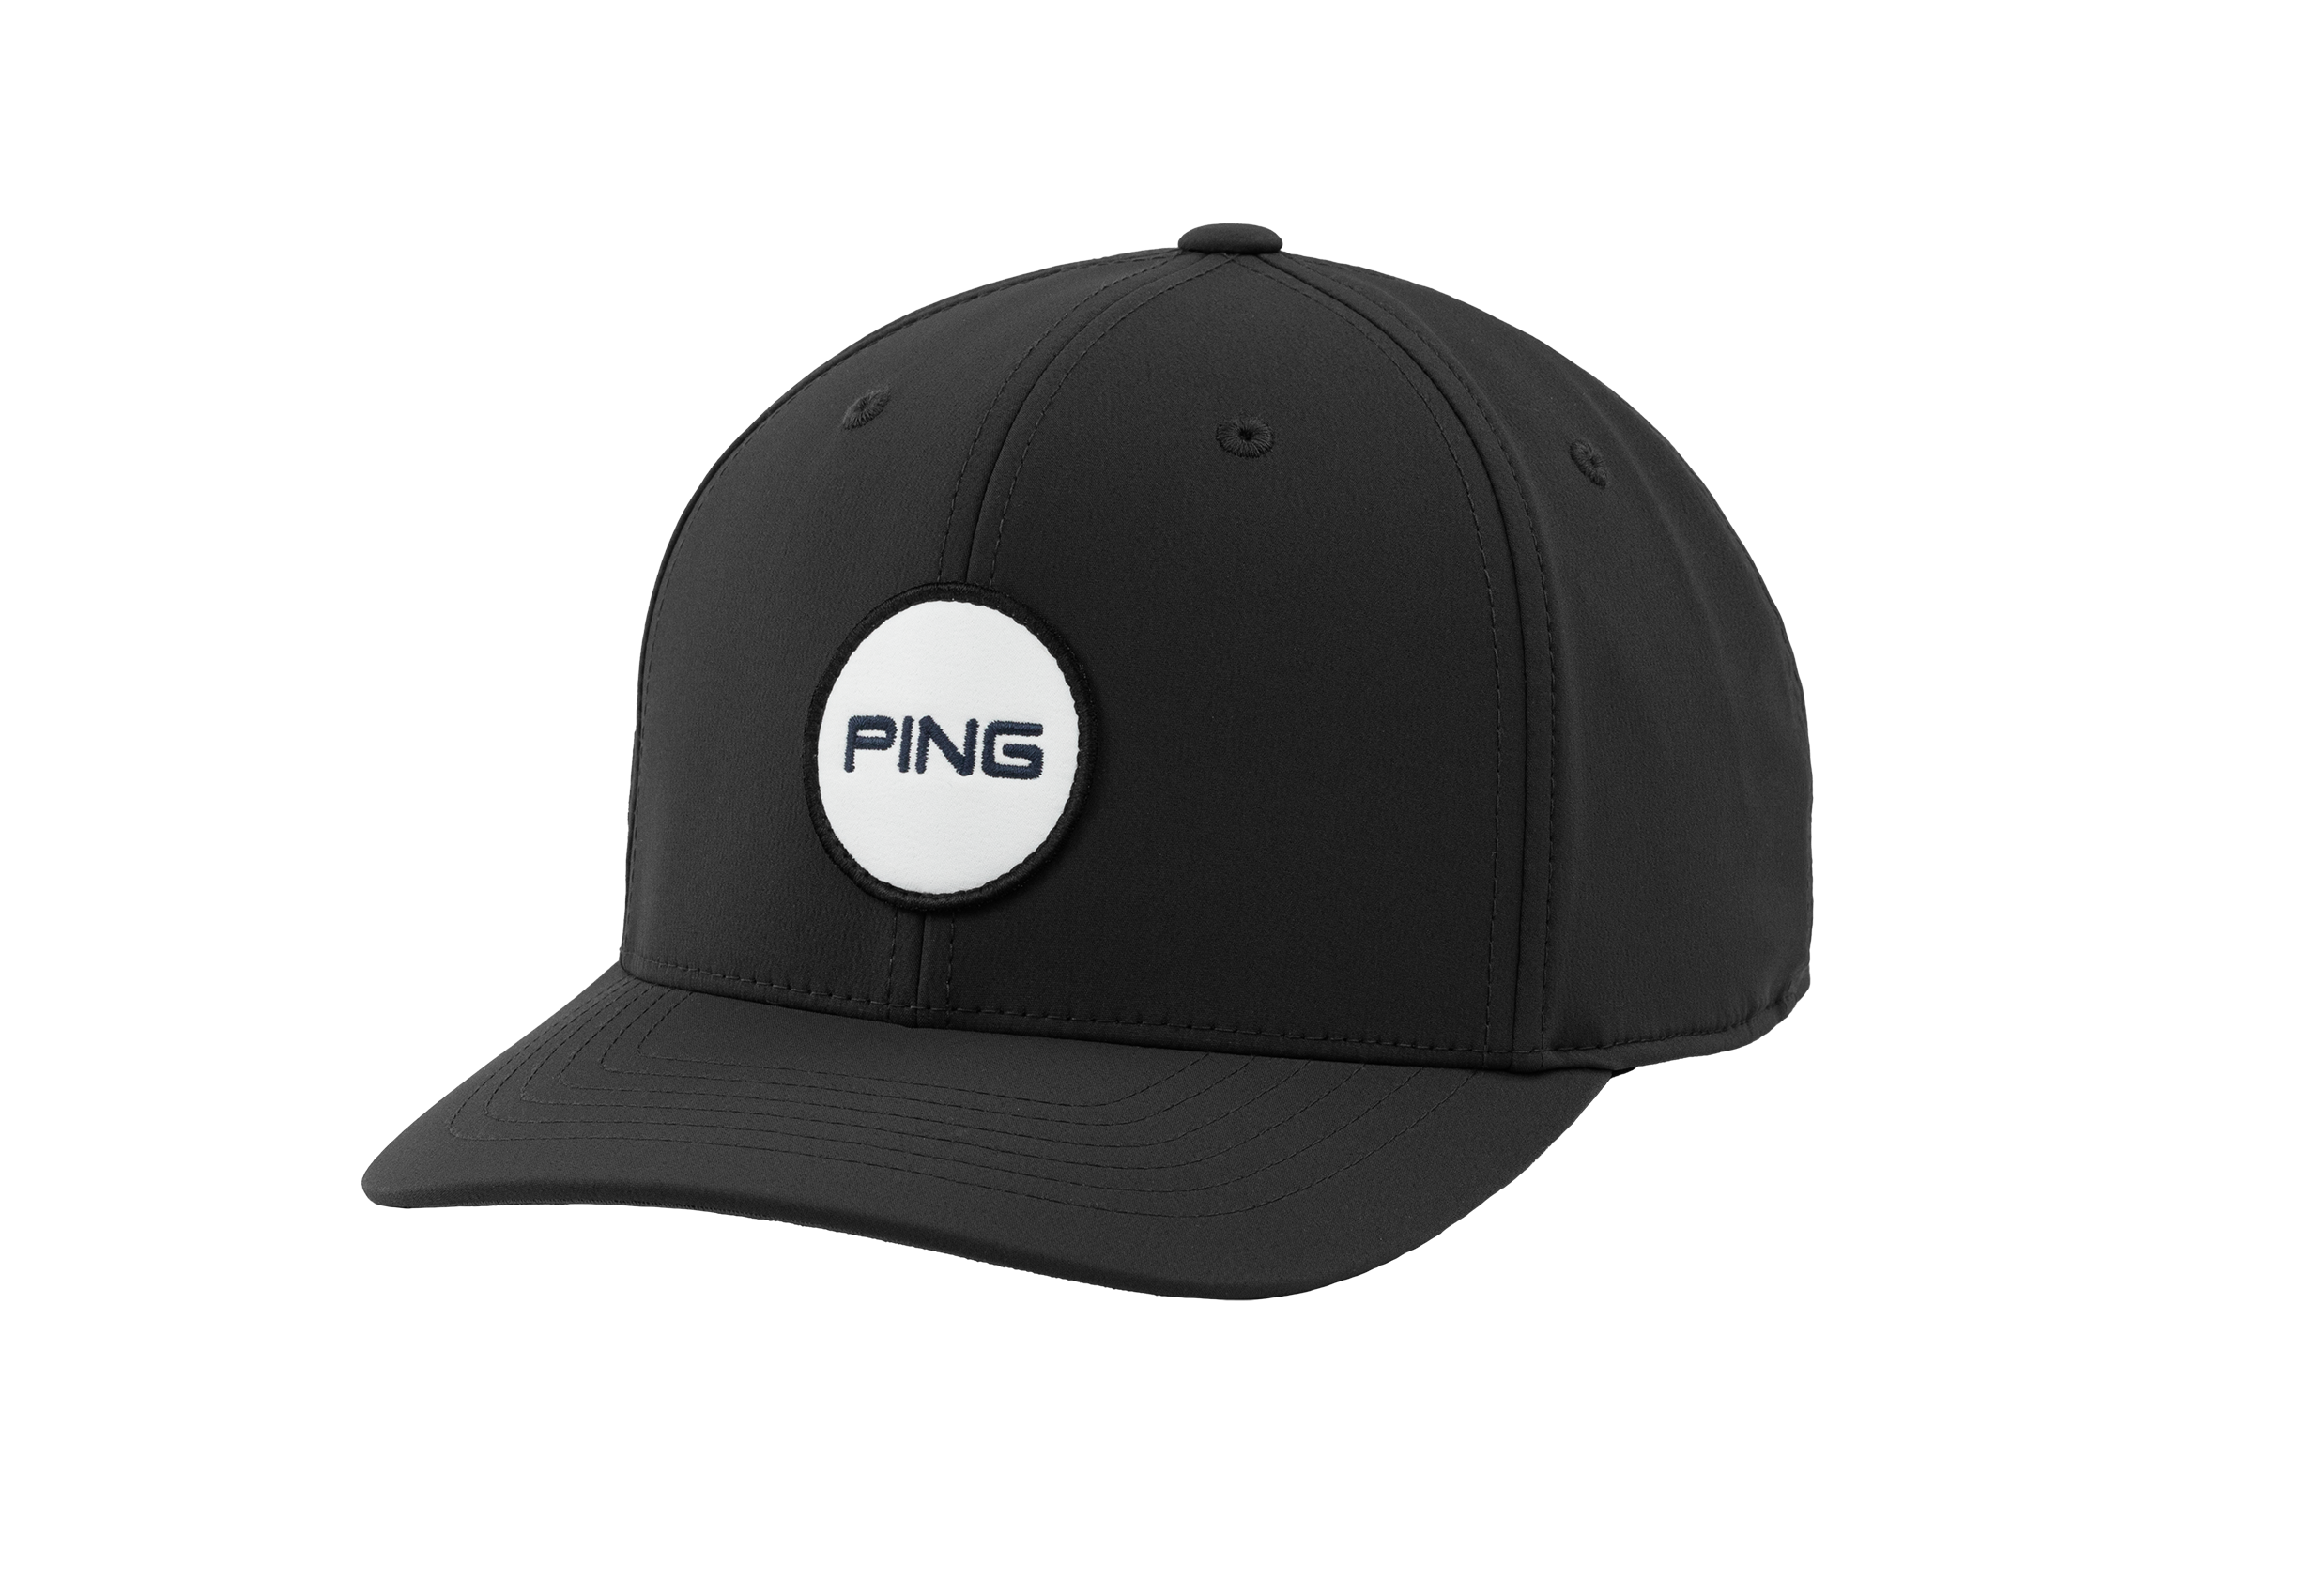 Ping Patch Cap